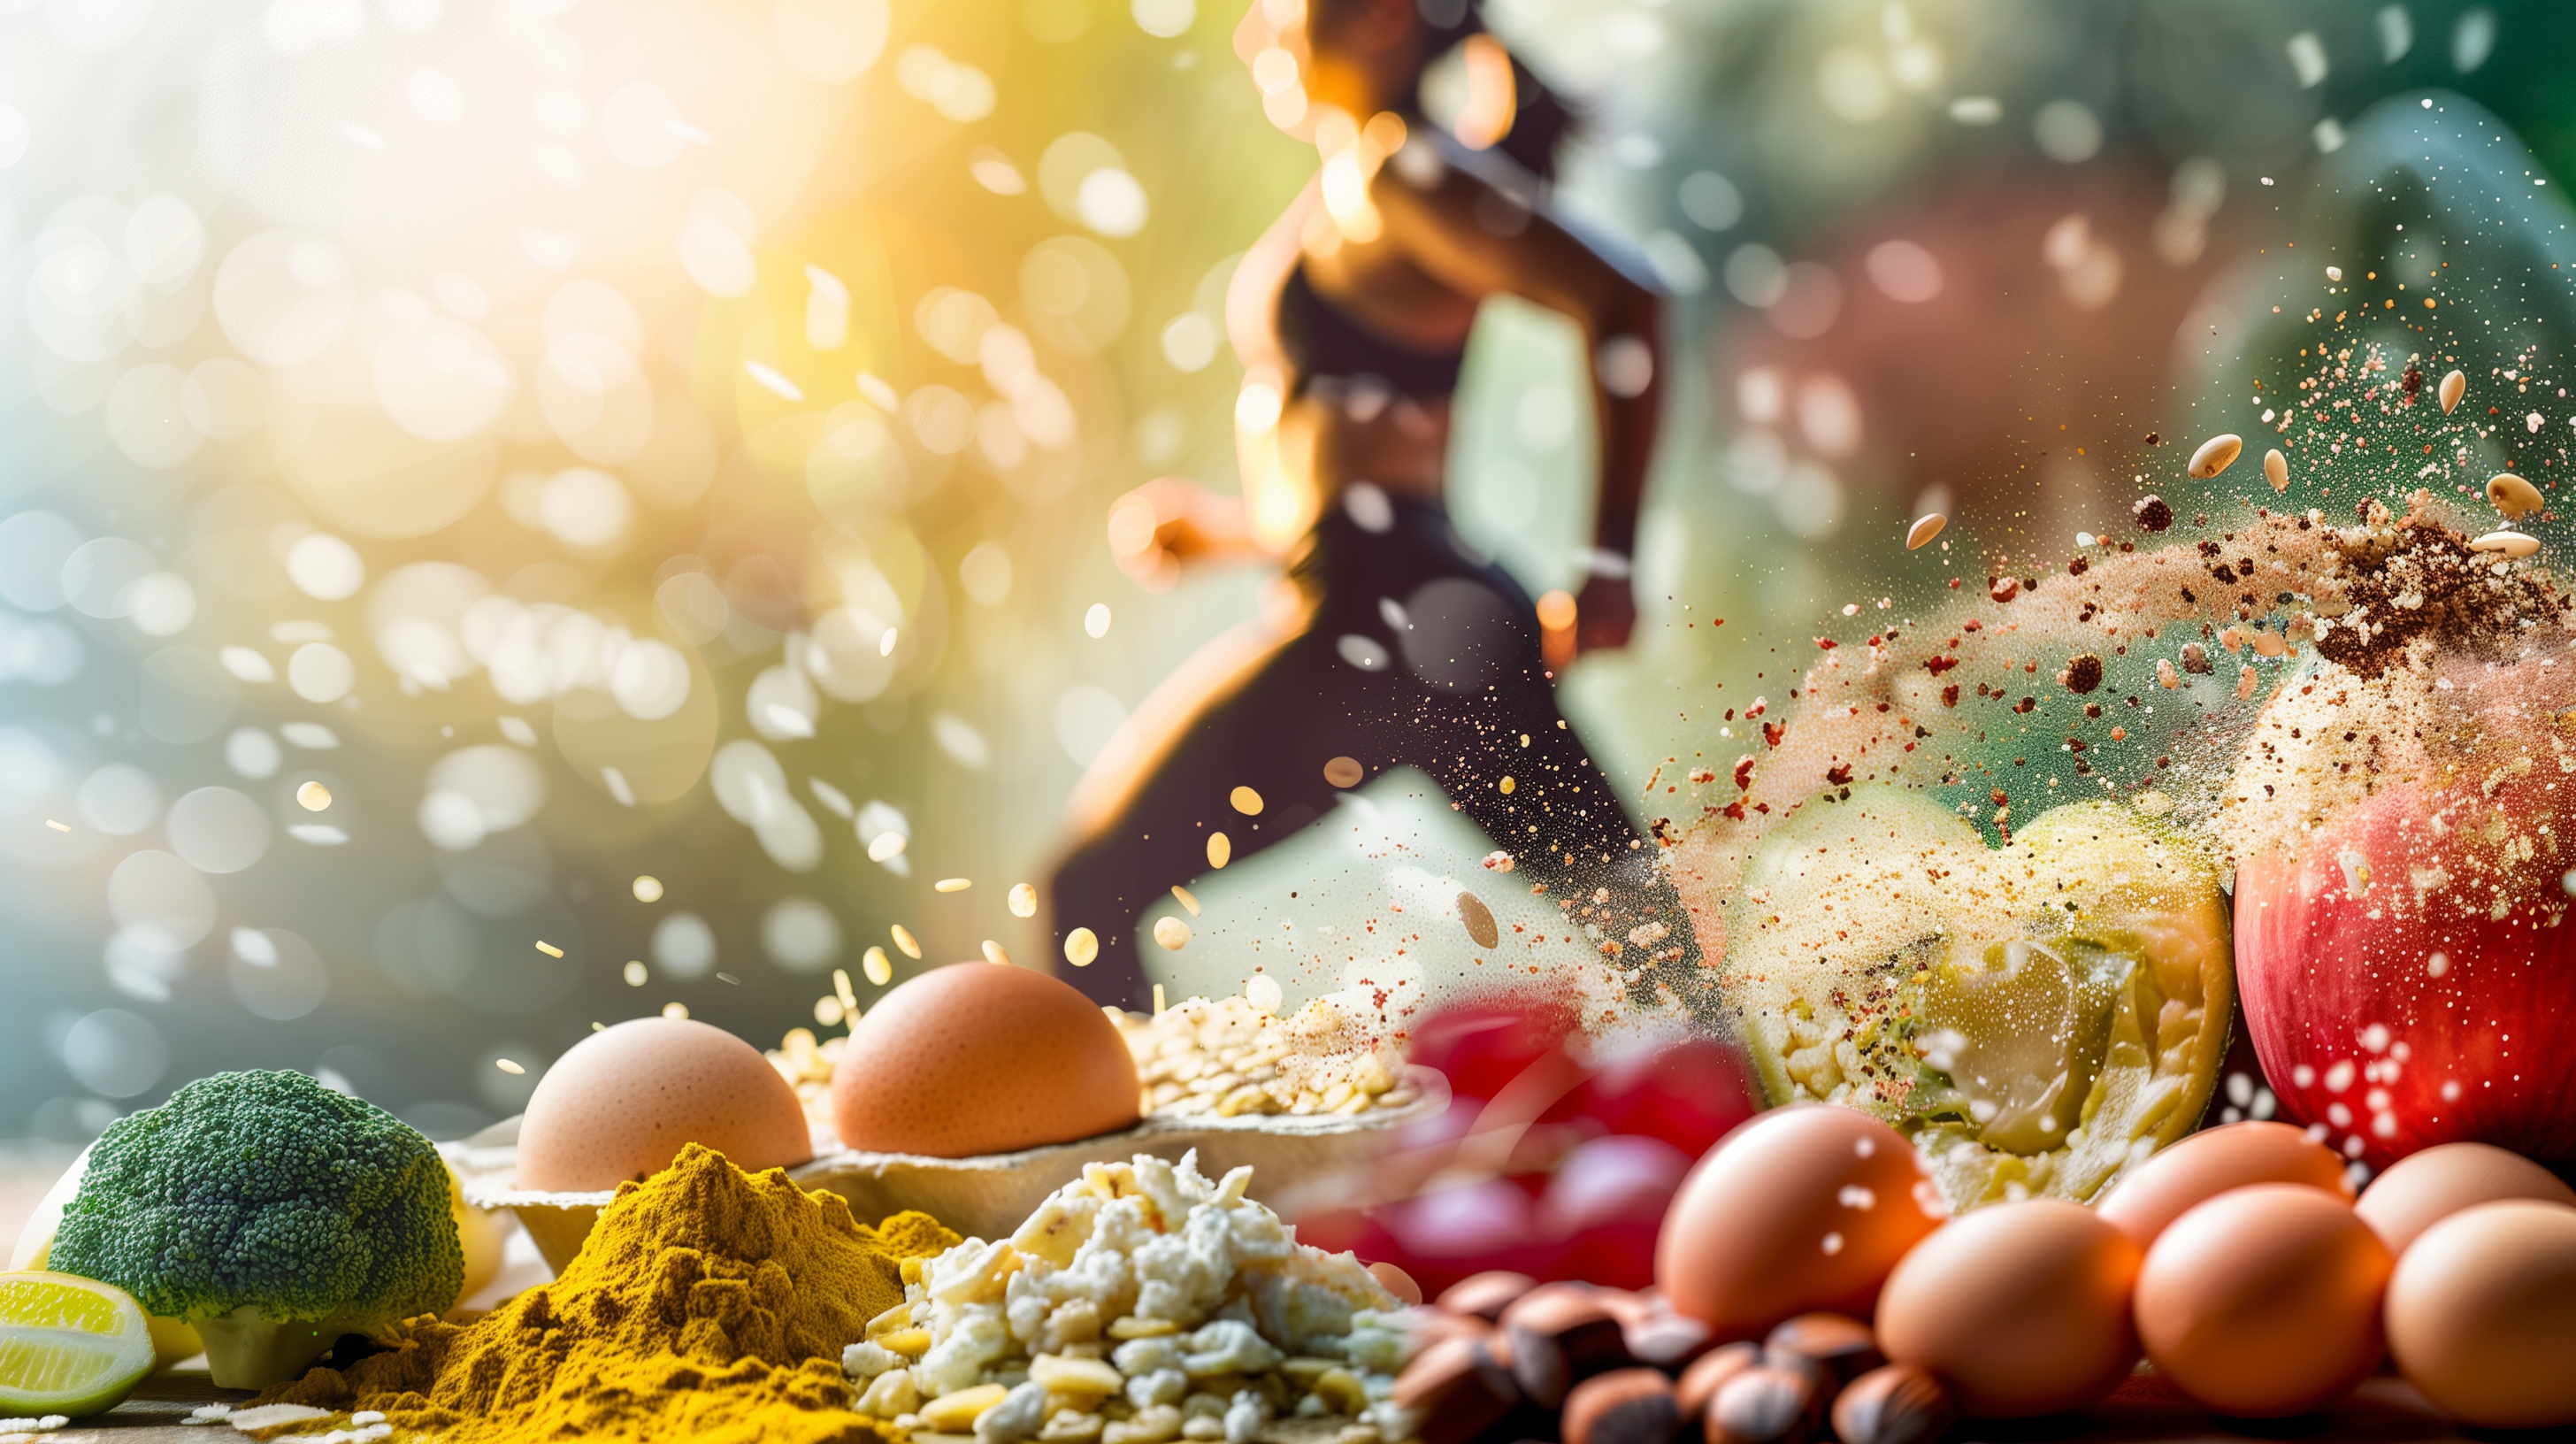 variety of colorful, natural foods rich in BCAAs like eggs, quinoa, and nuts, complemented by a silhouette of a woman exercising